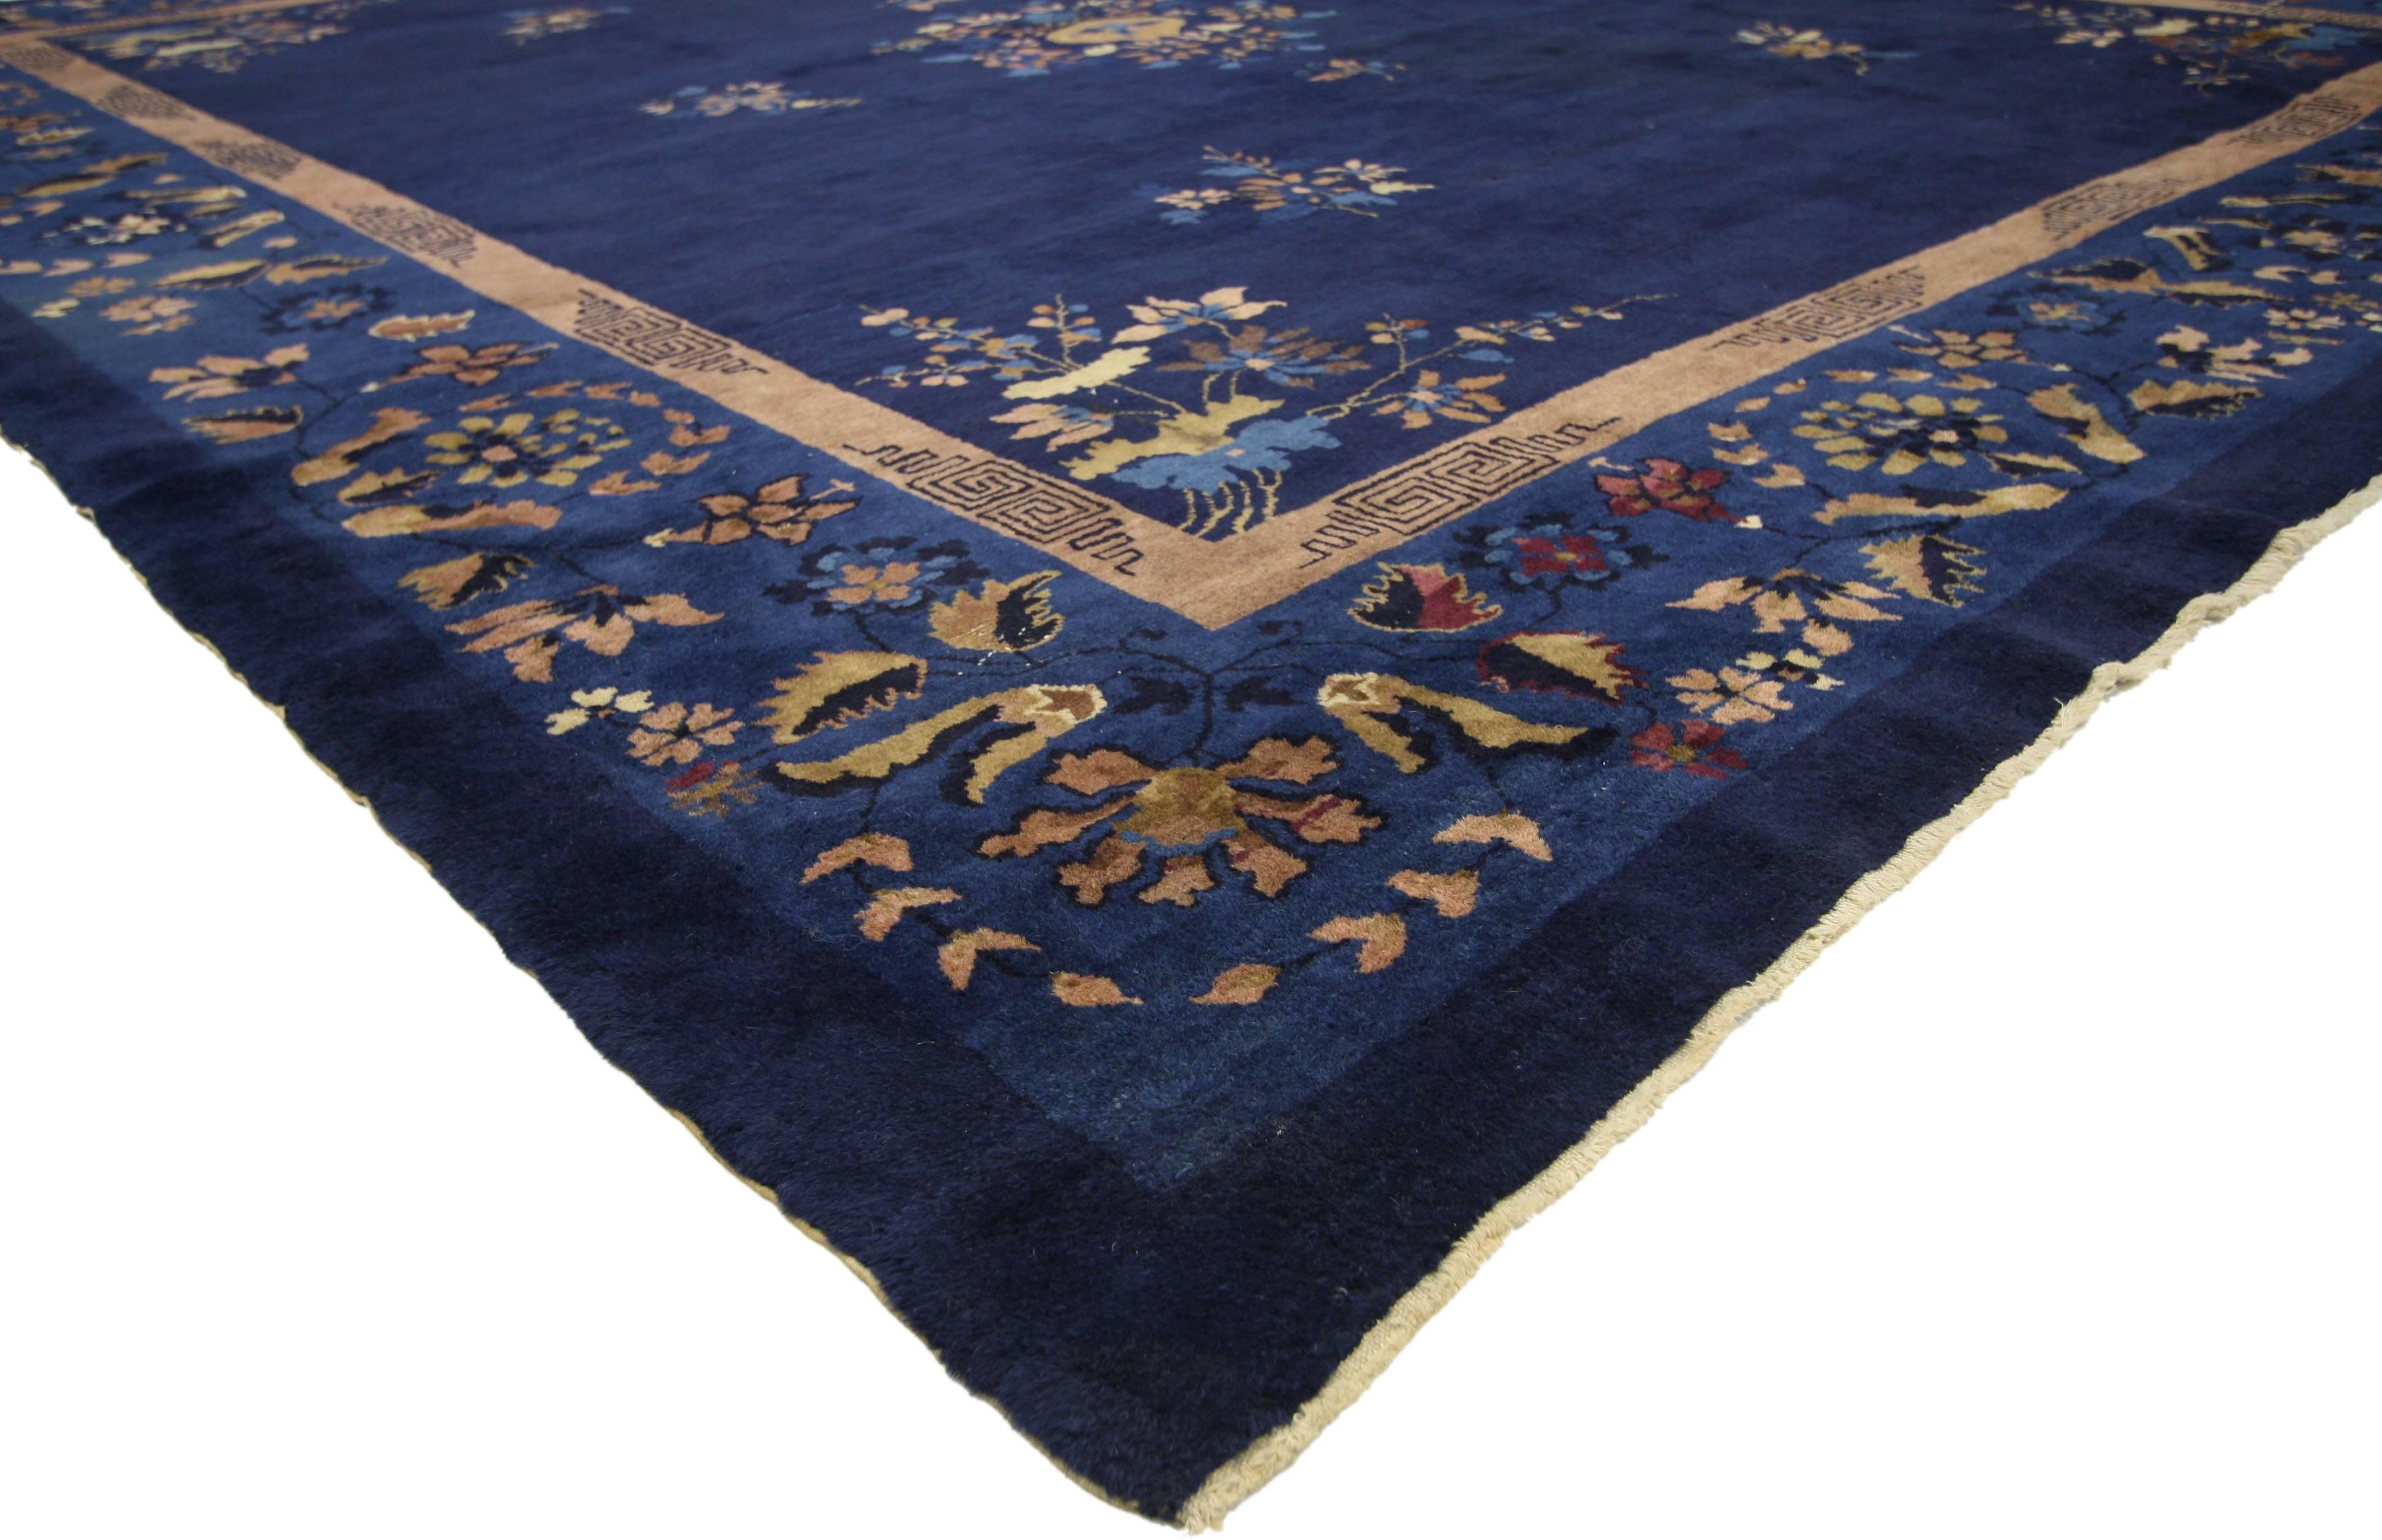 77140, antique Chinese Peking rug. Give a traditional room playfulness or warm up a modern space with this antique Chinese Peking rug featuring a chinoiserie Chic style. A simple yet striking flower bouquet and complementary floral spandrels are